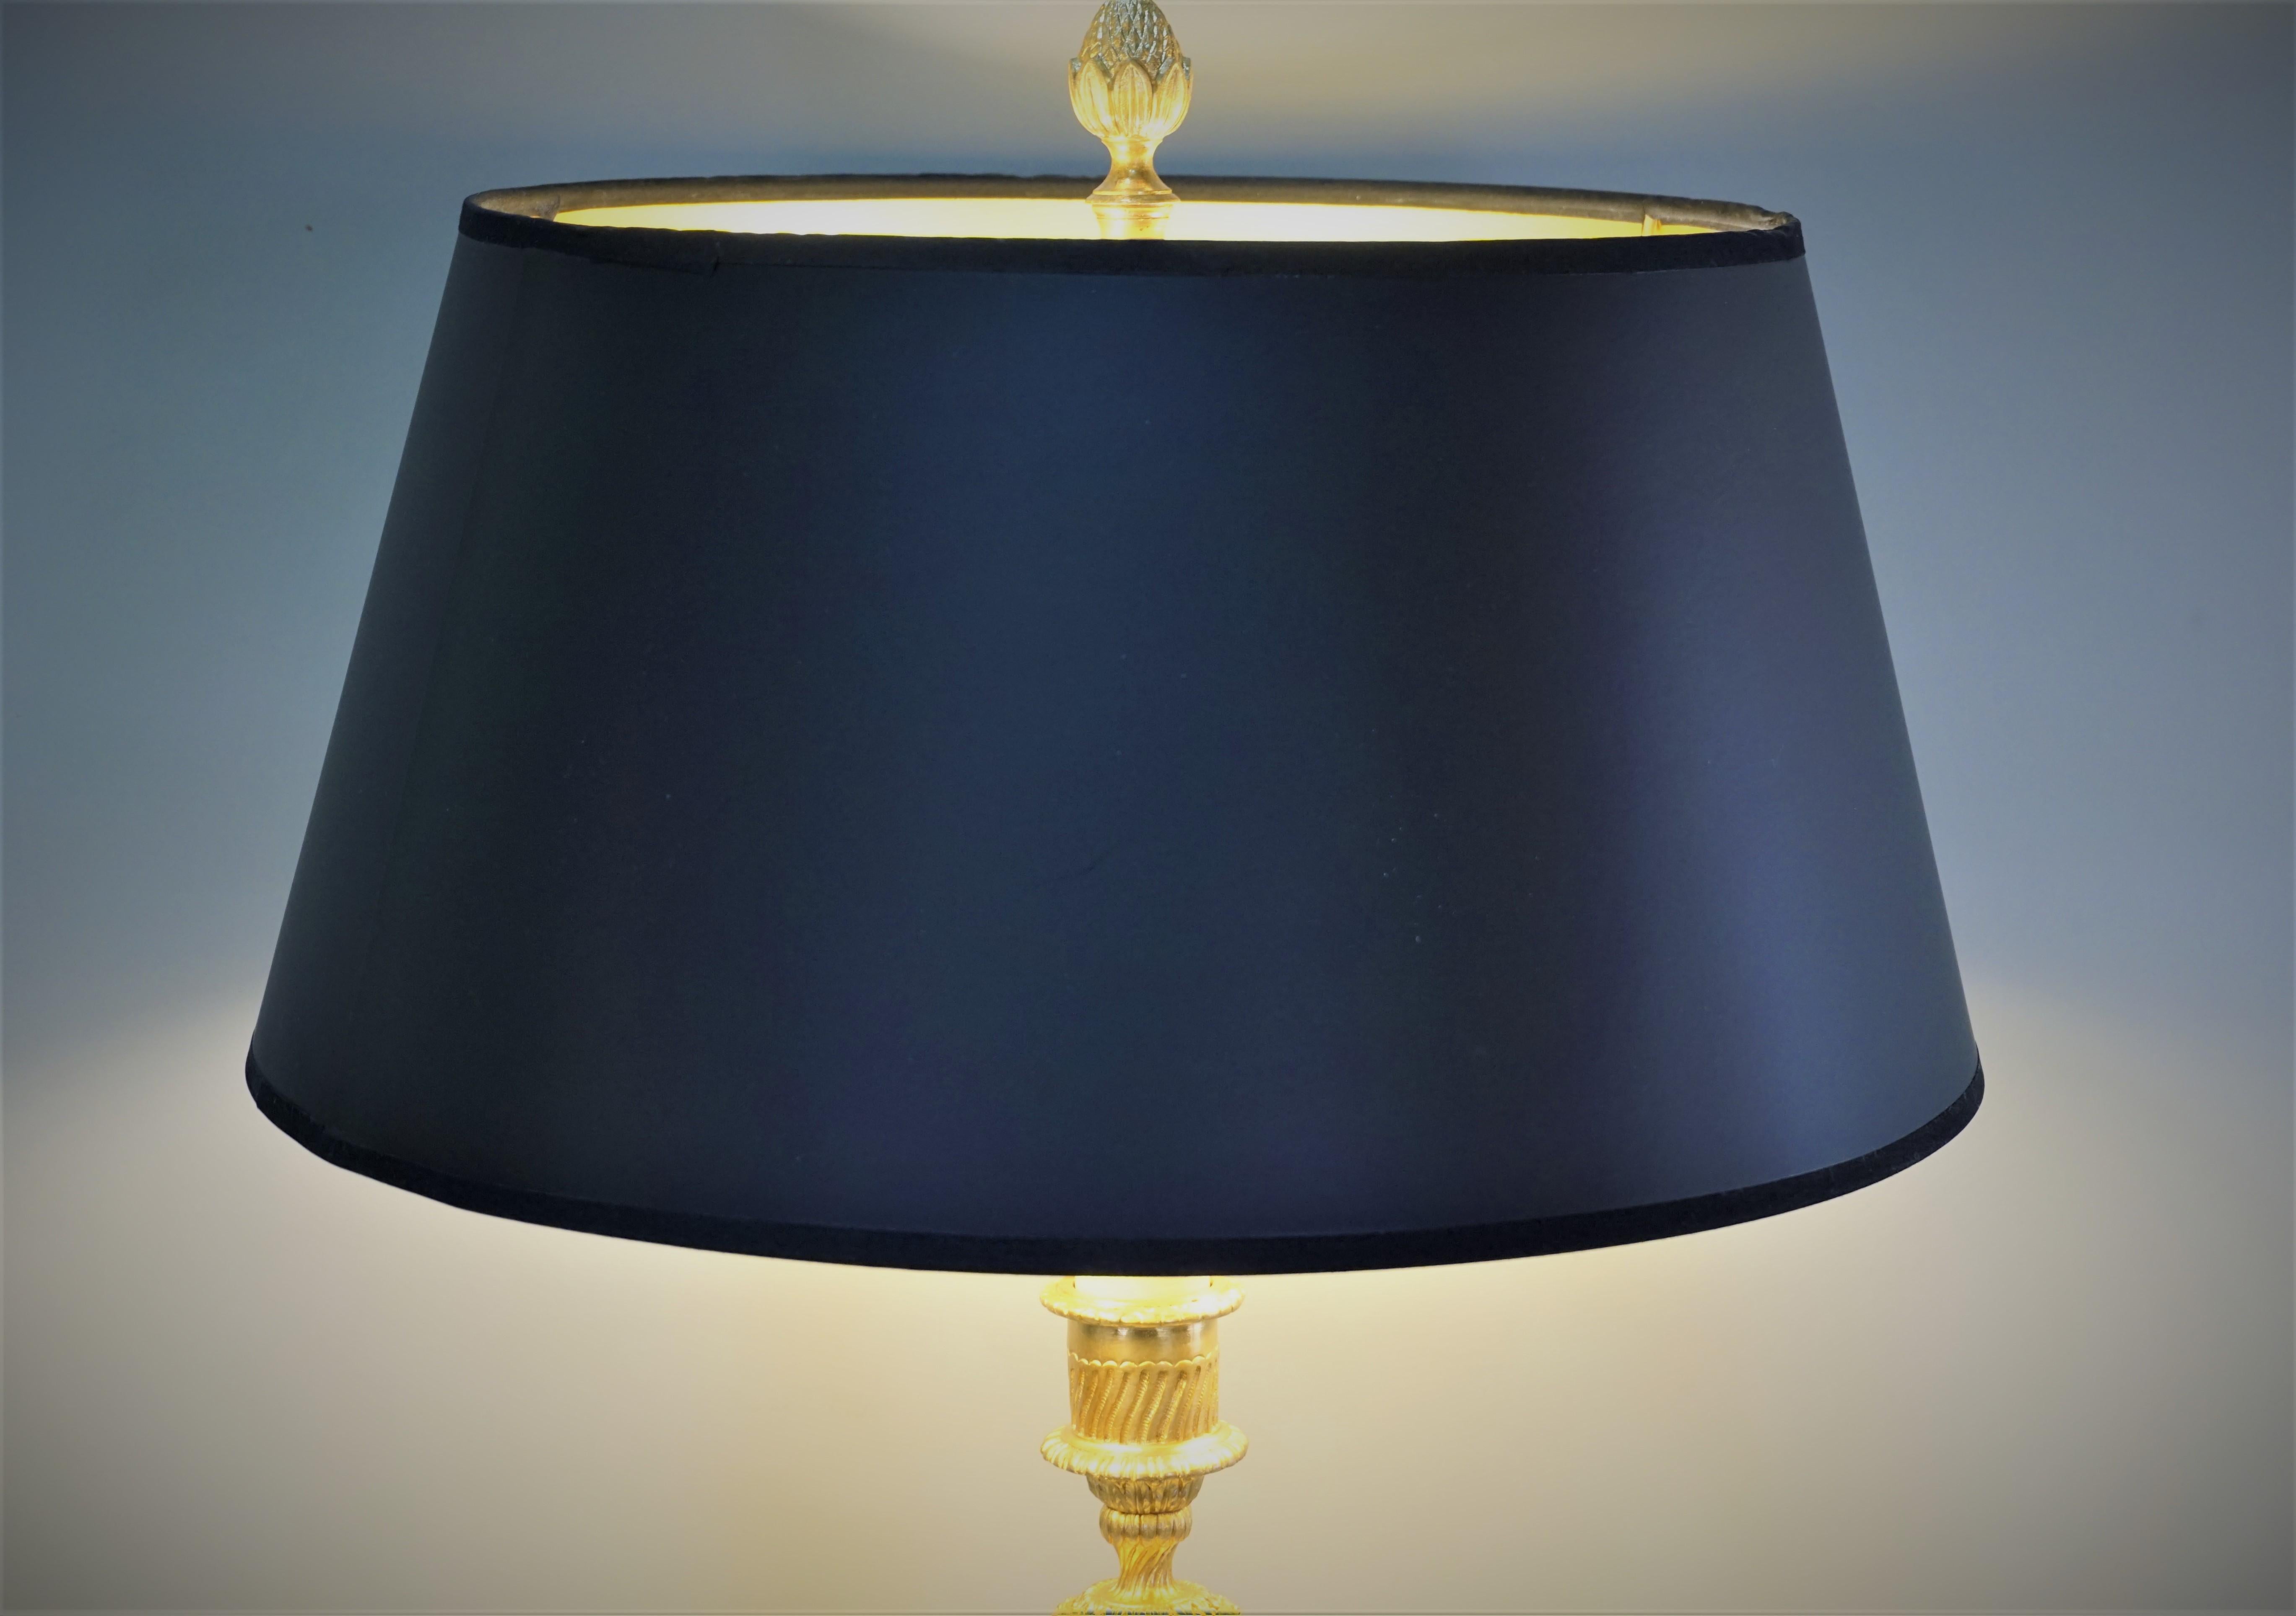 Earl 20th century classic design electrified large candlestick to an elegant table lamp.